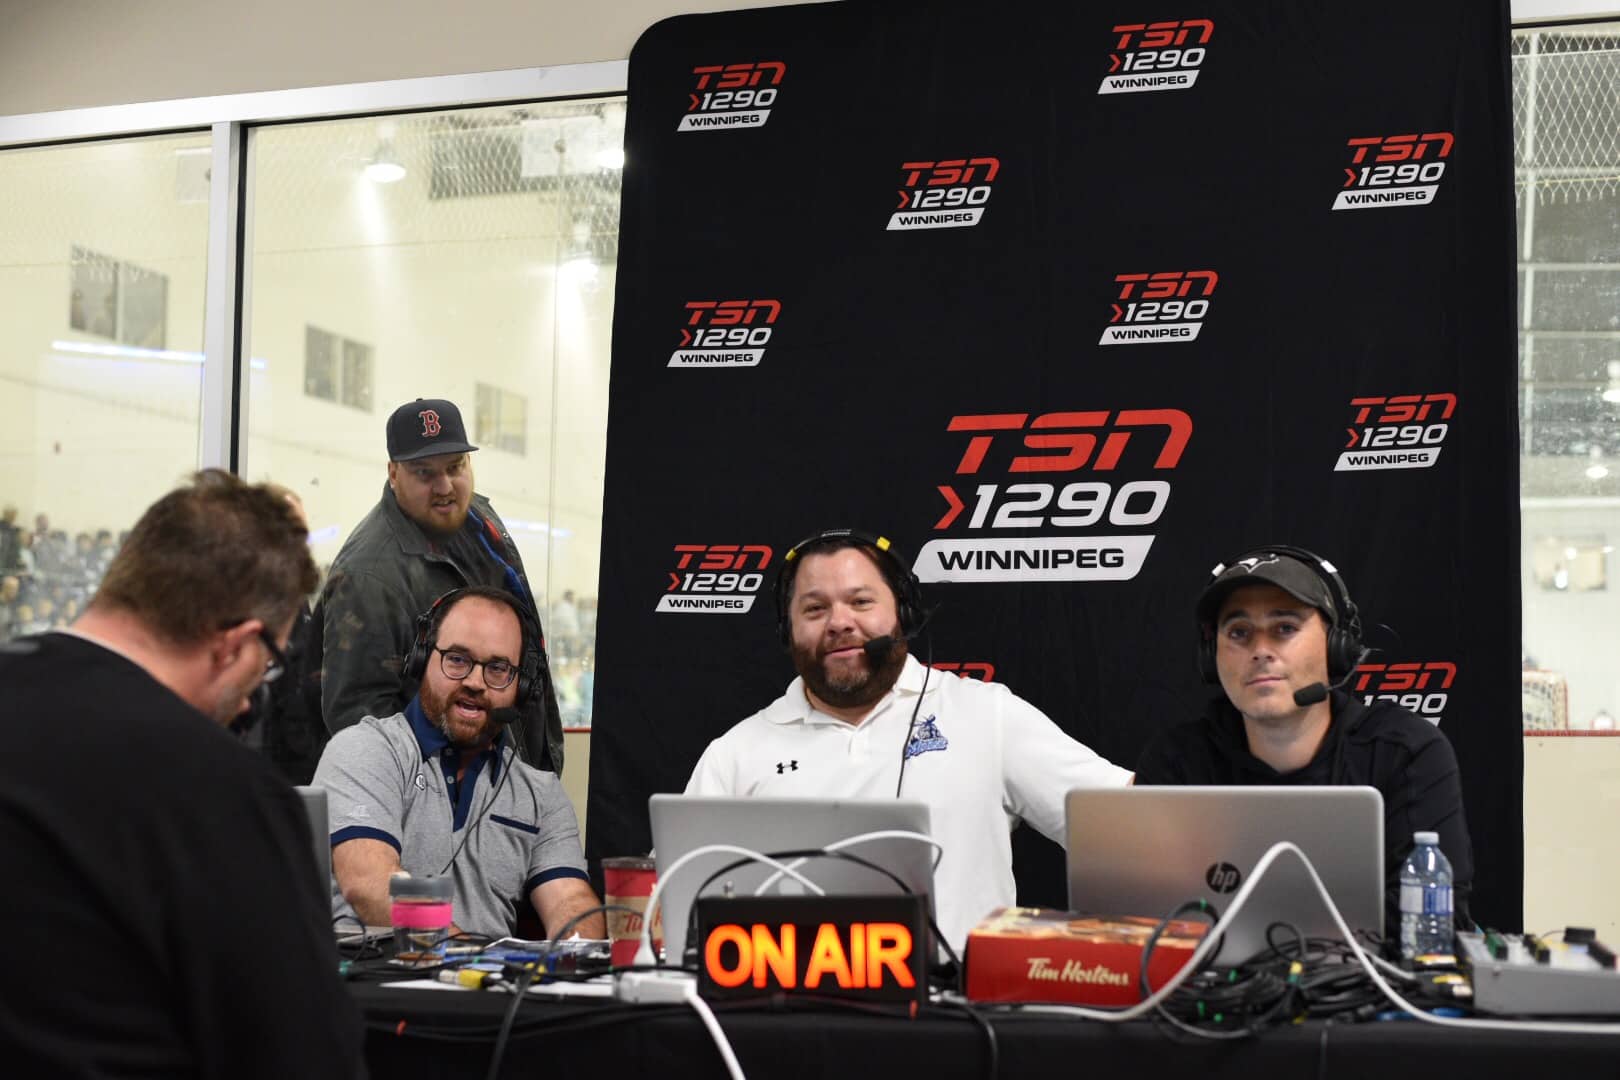 IC Hockey Show at IcePlex front shot